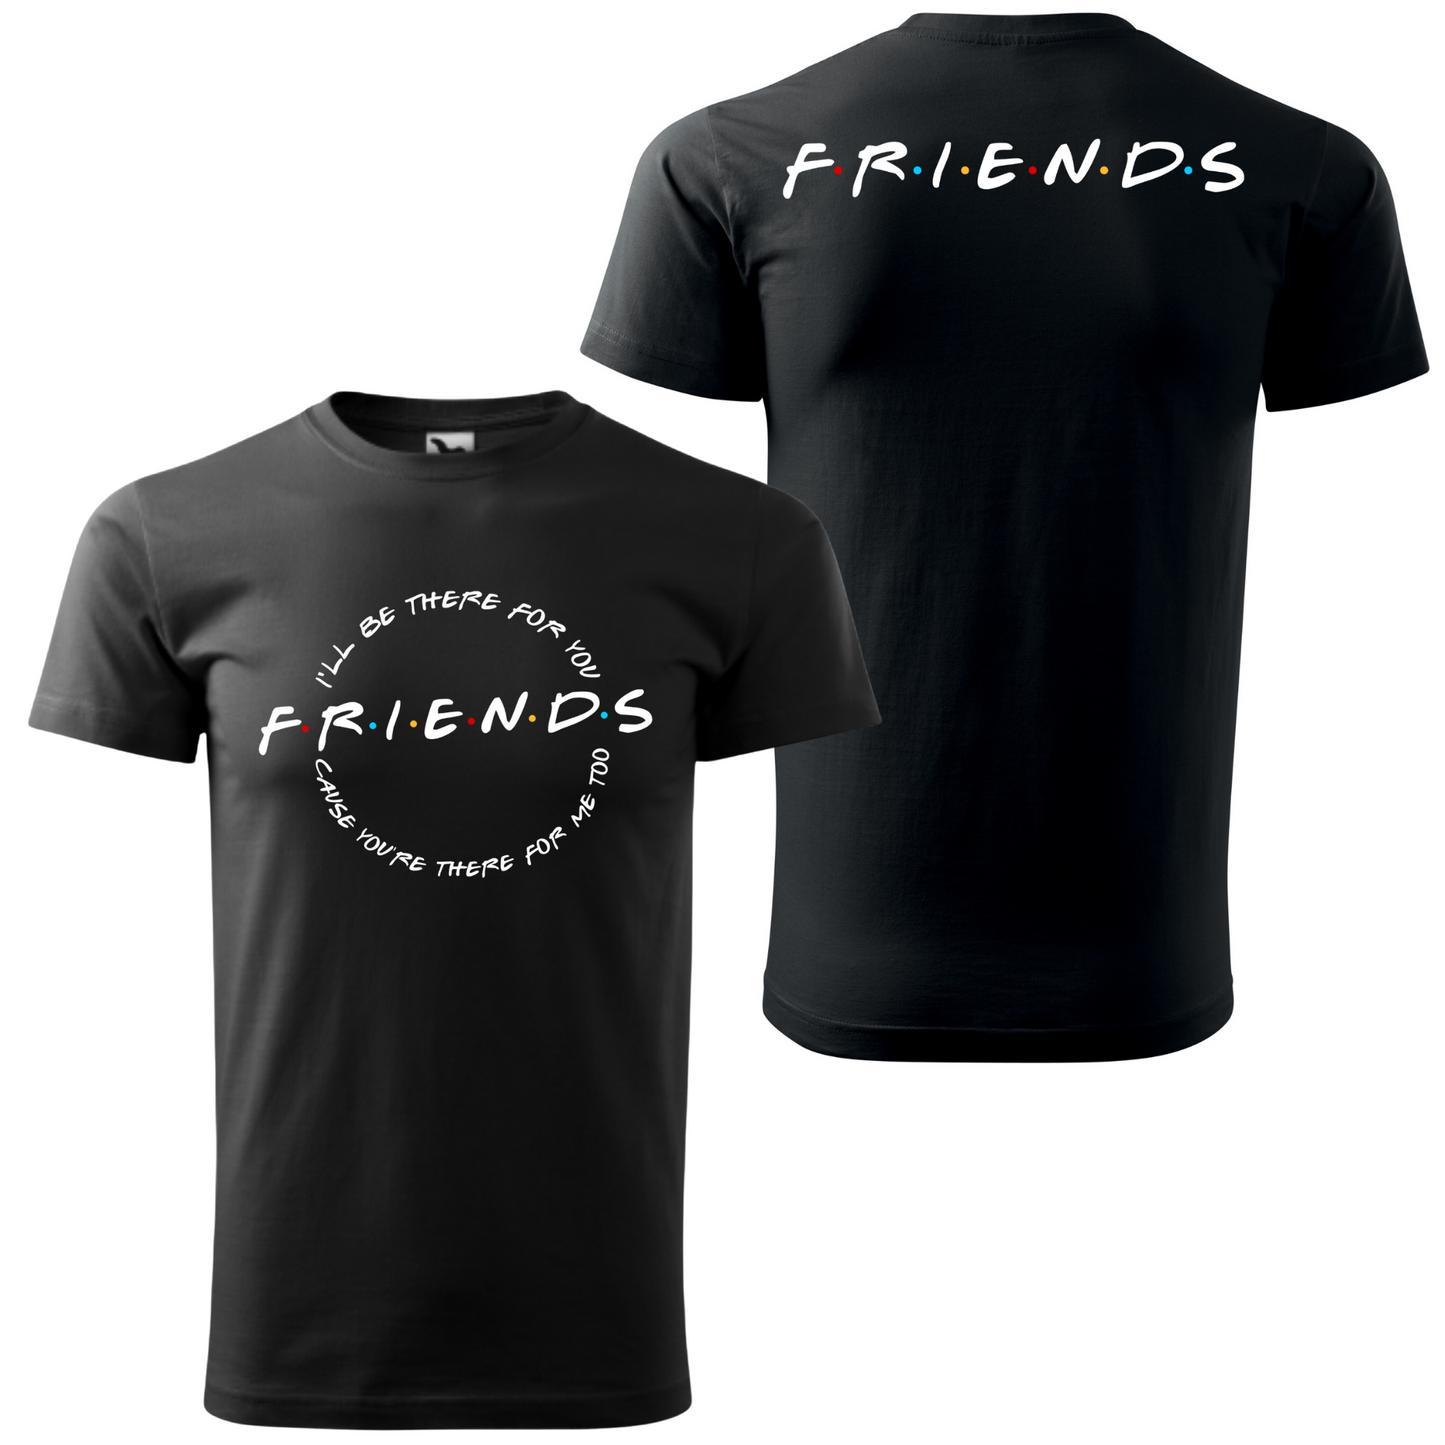 Tricou personalizat barbat - I'll Be There For You